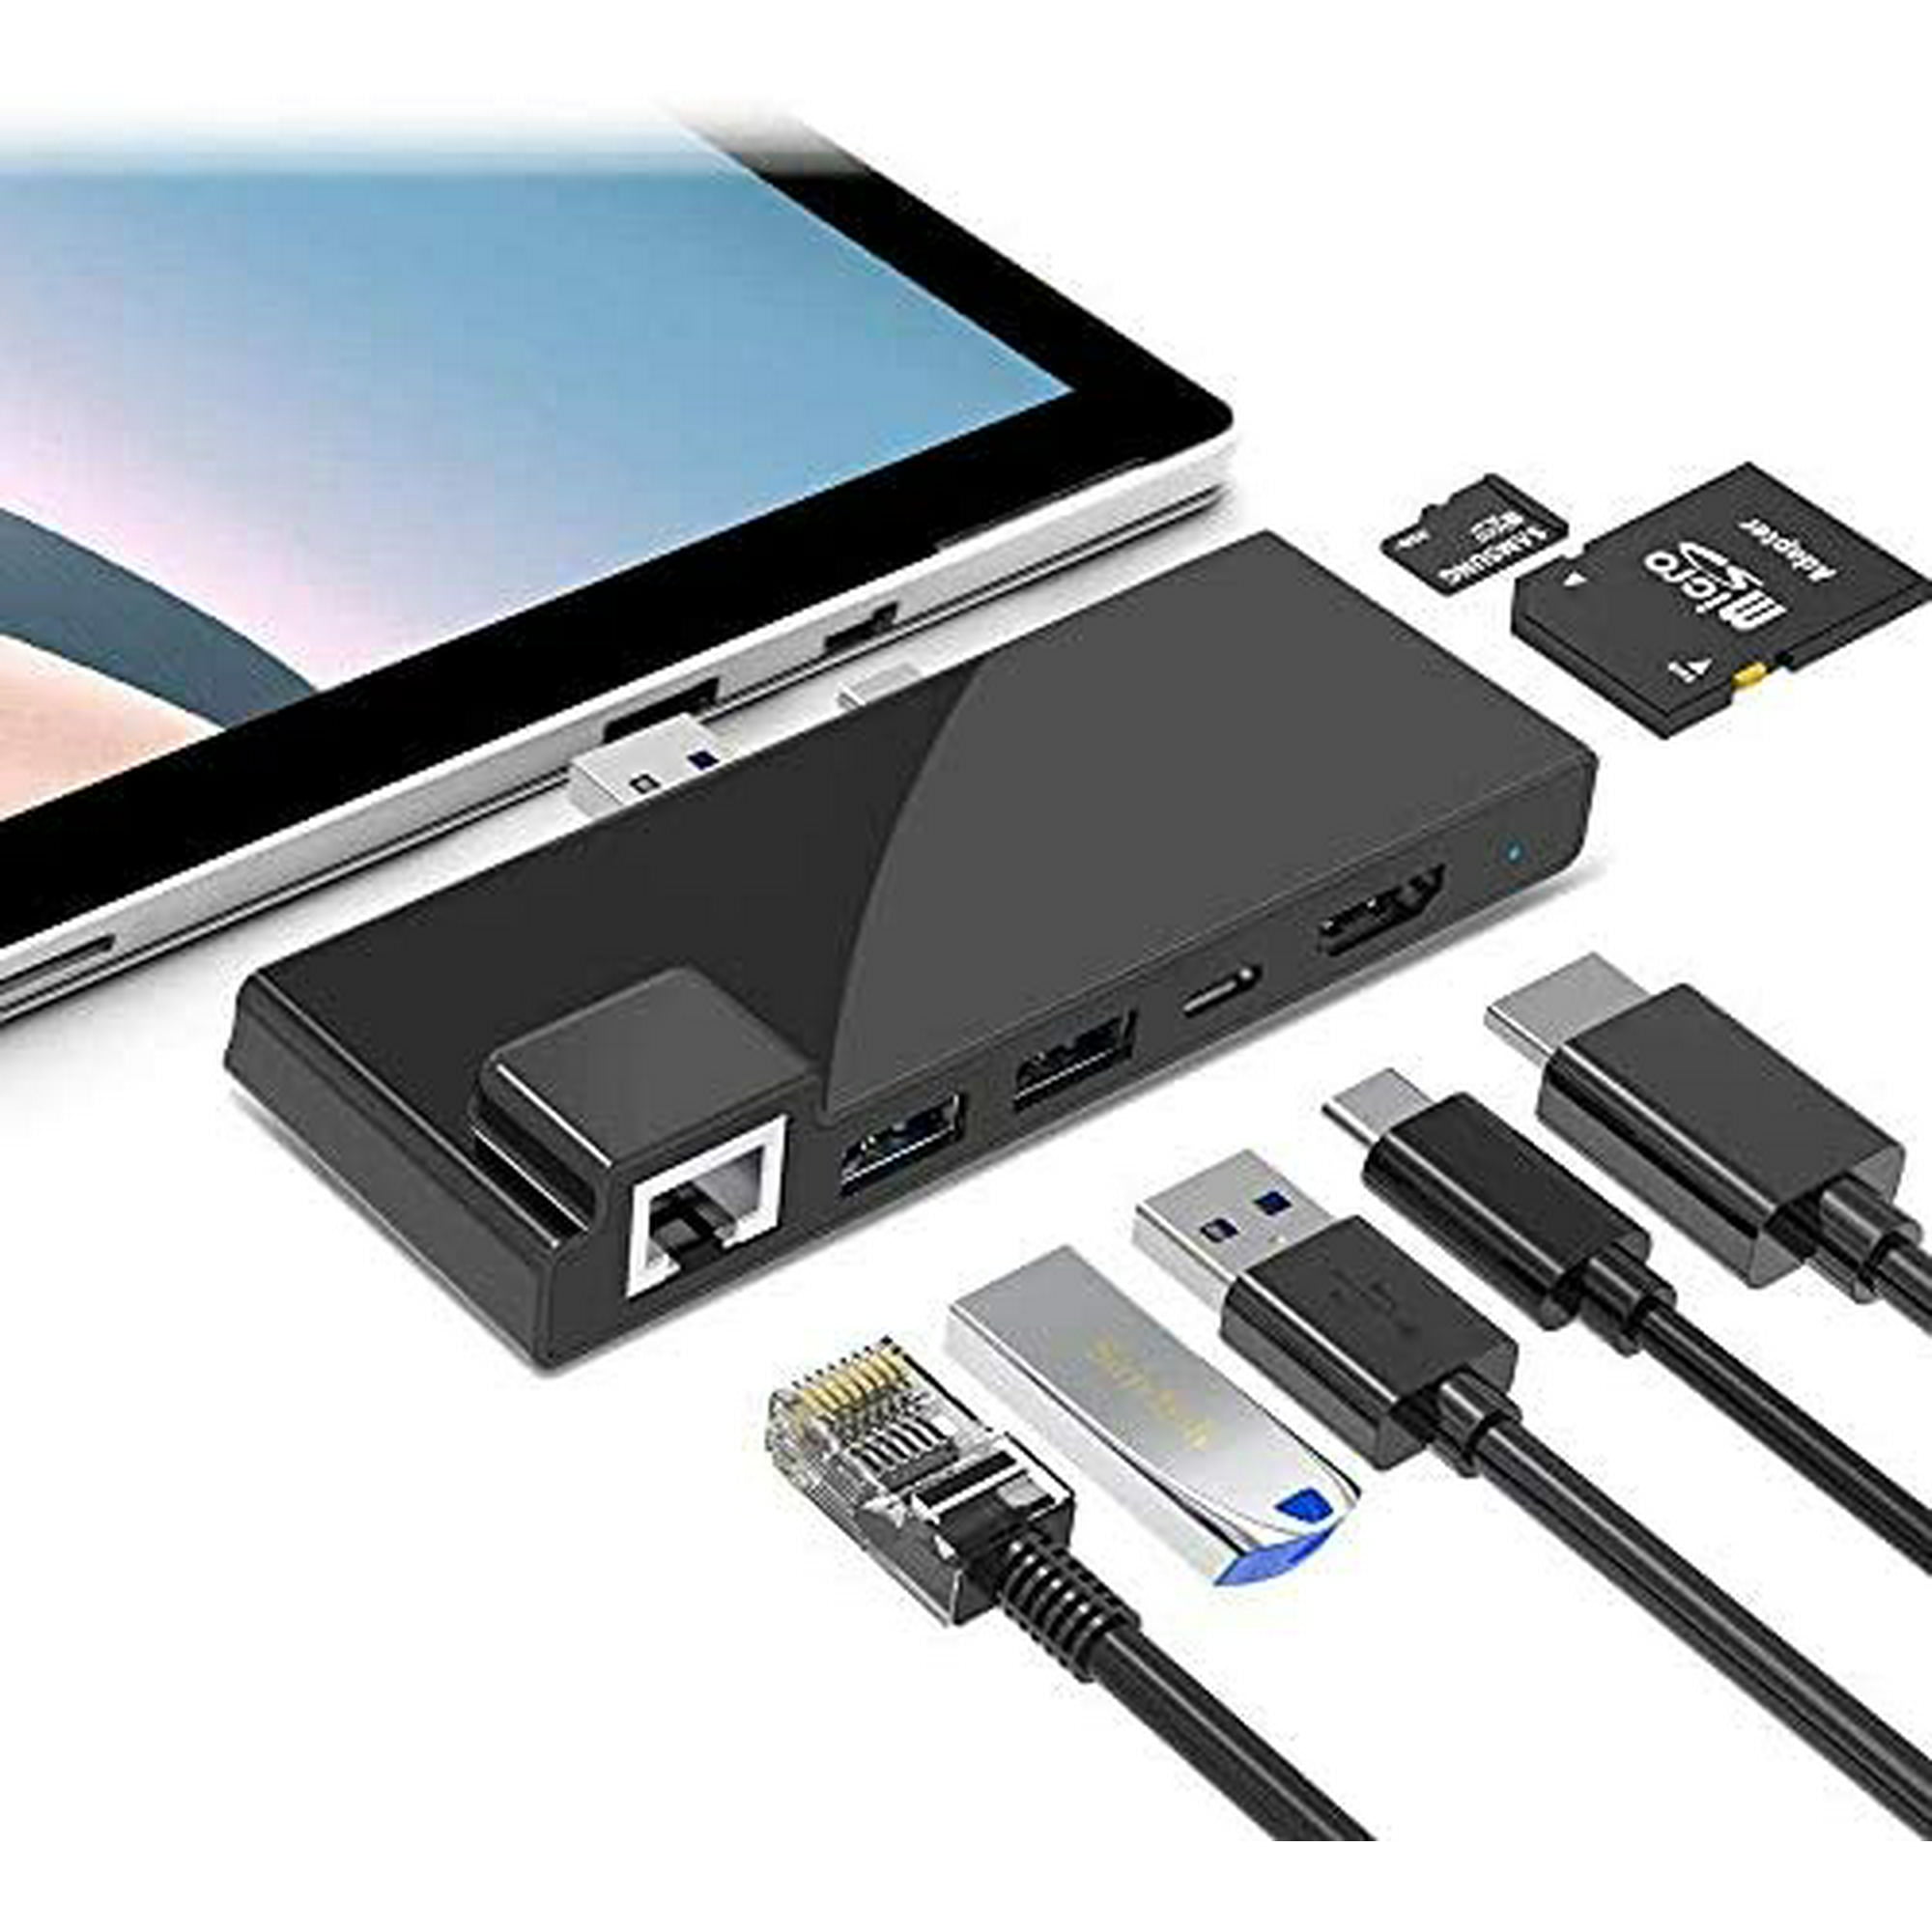 Afhængighed Litteratur Uskyld Surface Pro 7 Dock Station, Surface Pro 7 Hub Adapter with 4K HDMI Adapter,  1000M Gigabit Ethernet LAN, USB C PD | Walmart Canada